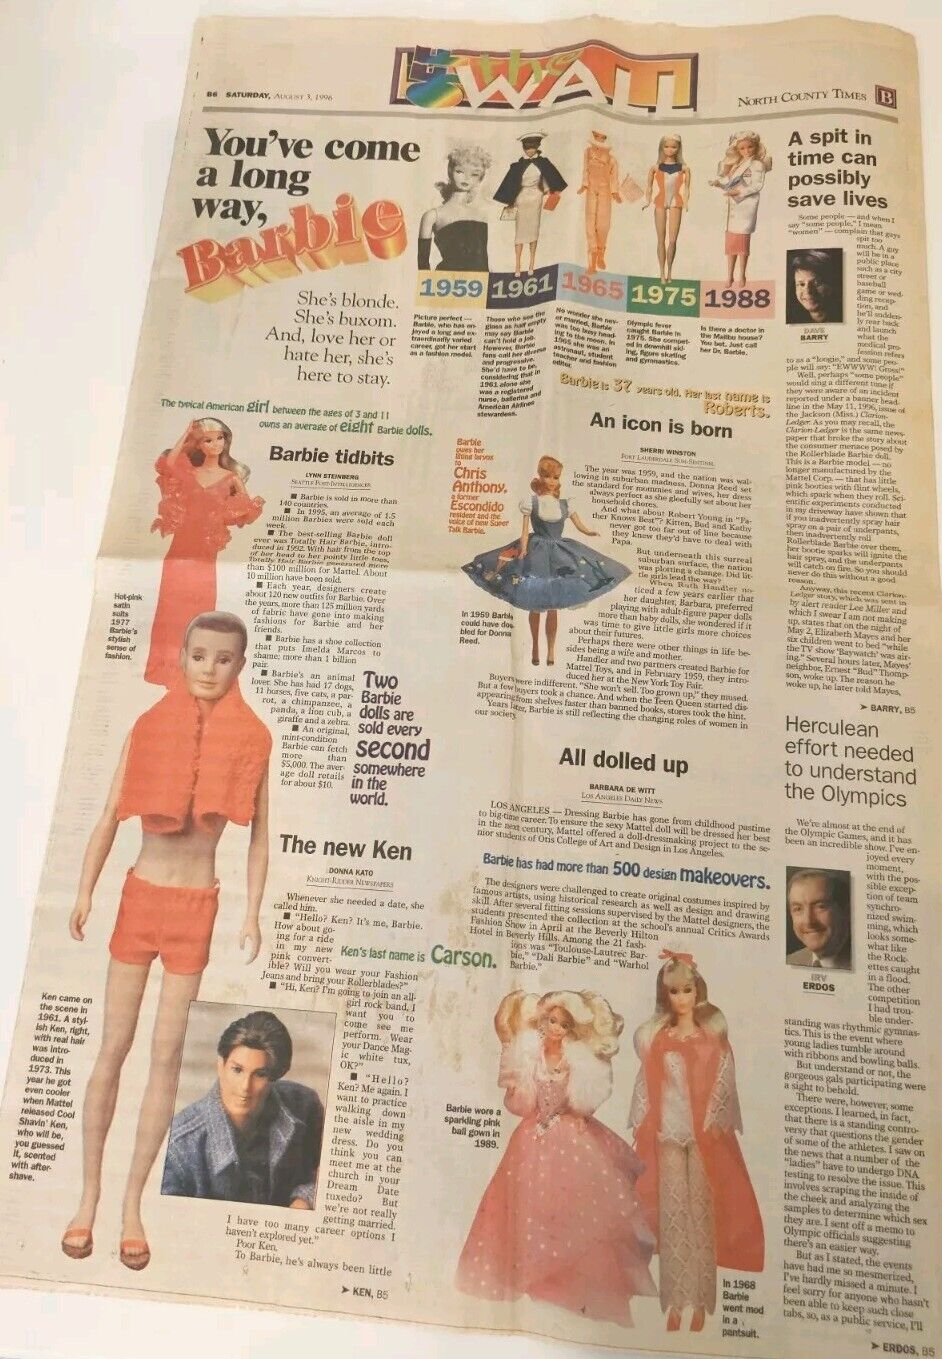 Vintage Barbie 1996 Newspaper Article - North County Times San Diego Local 